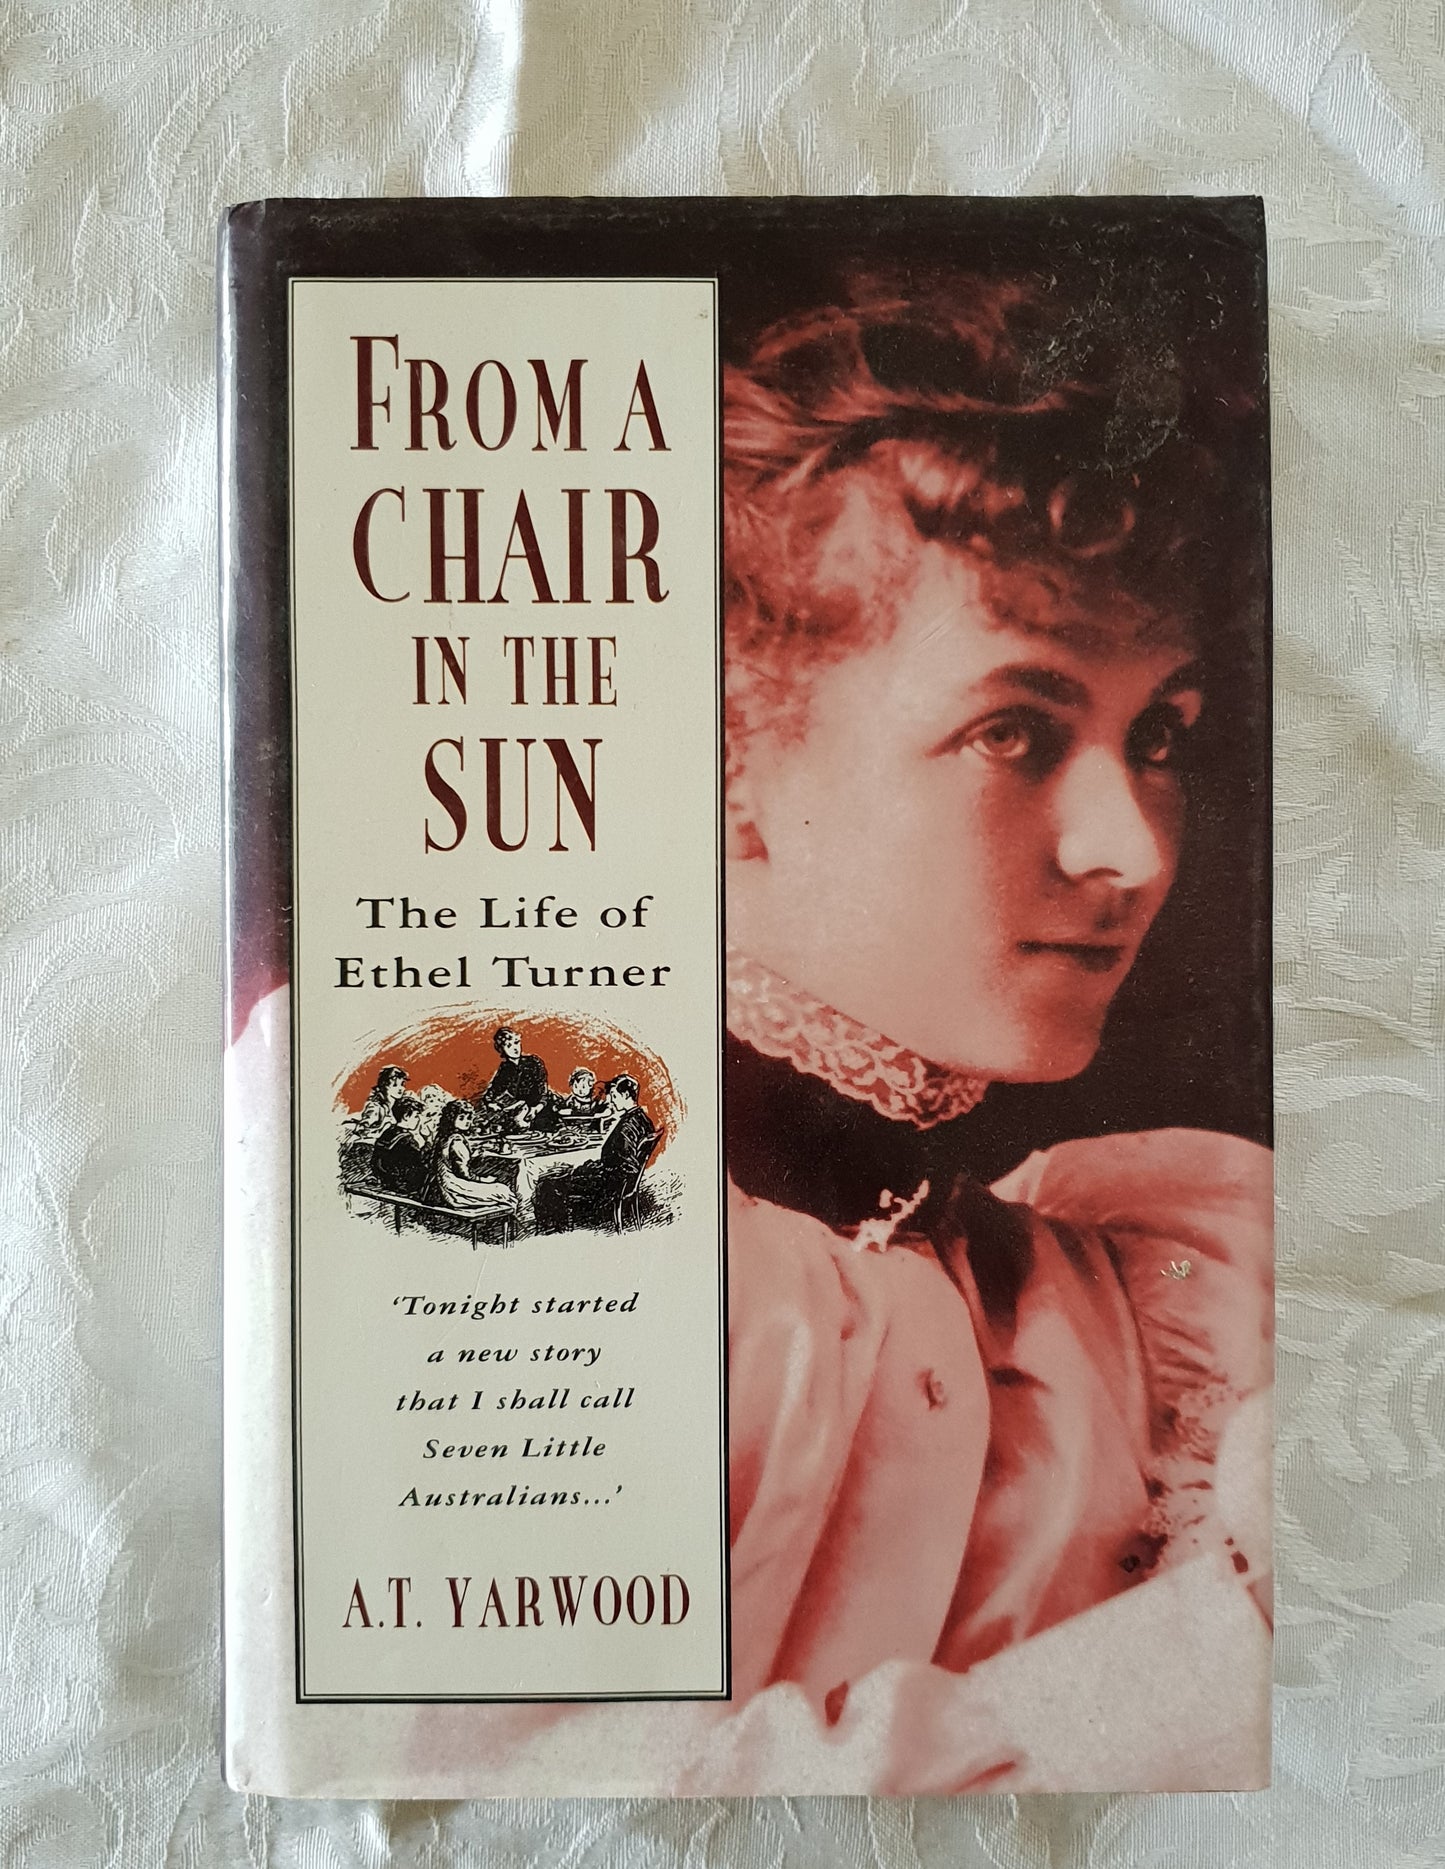 From A Chair In The Sun  The Life of Ethel Turner  by A. T. Yarwood